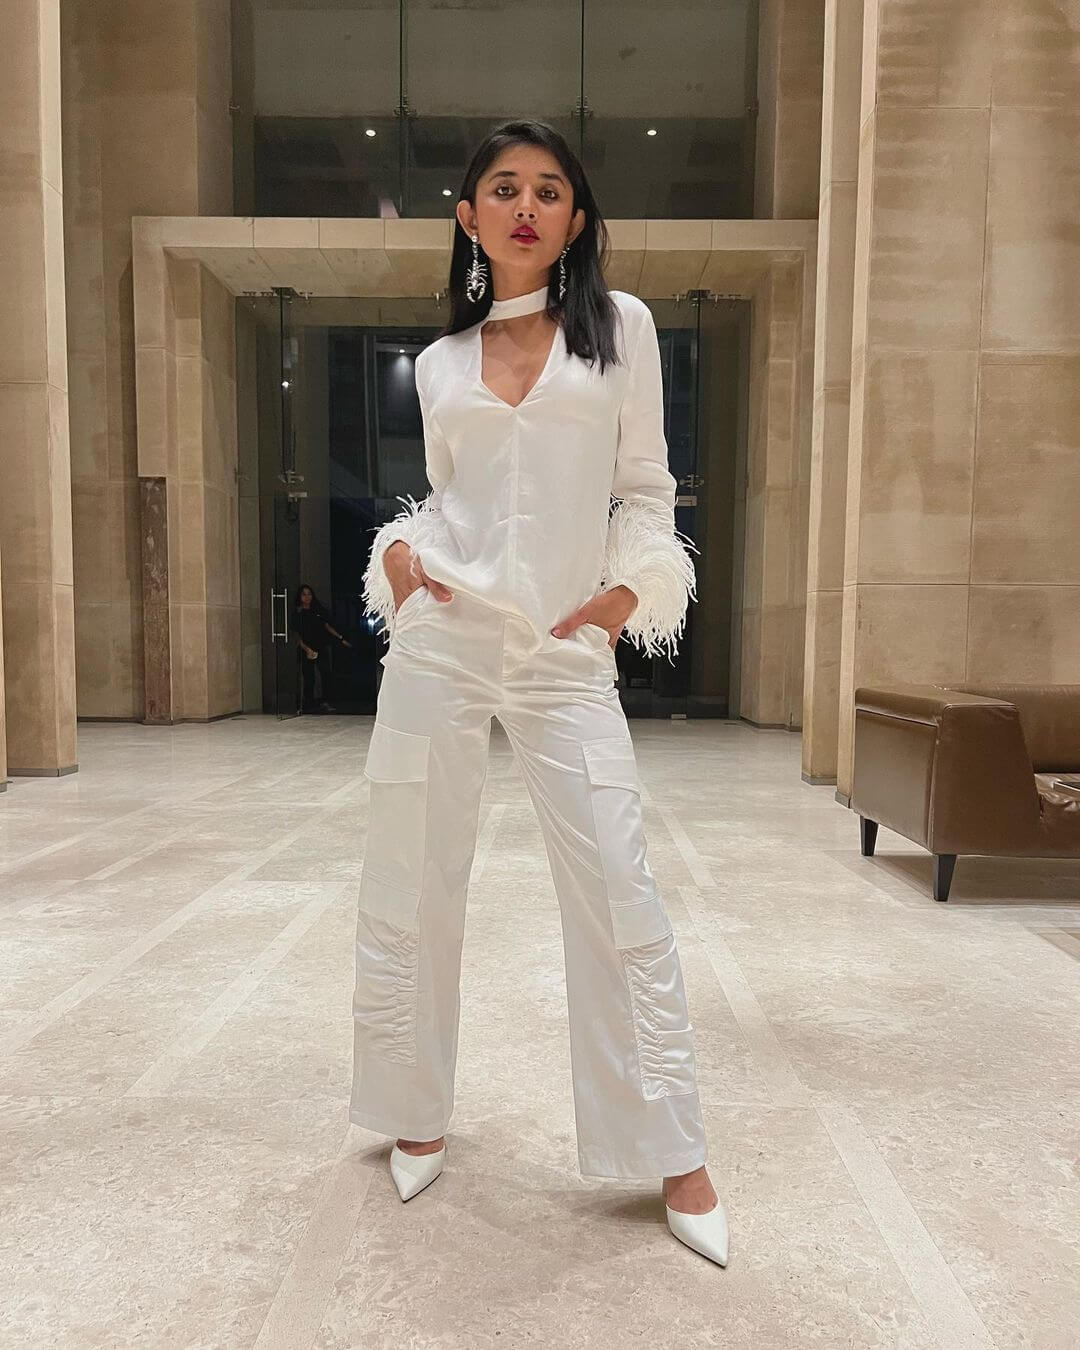 Kanika Look Hot In White Satin Ruffle Jumpsuit Outfit